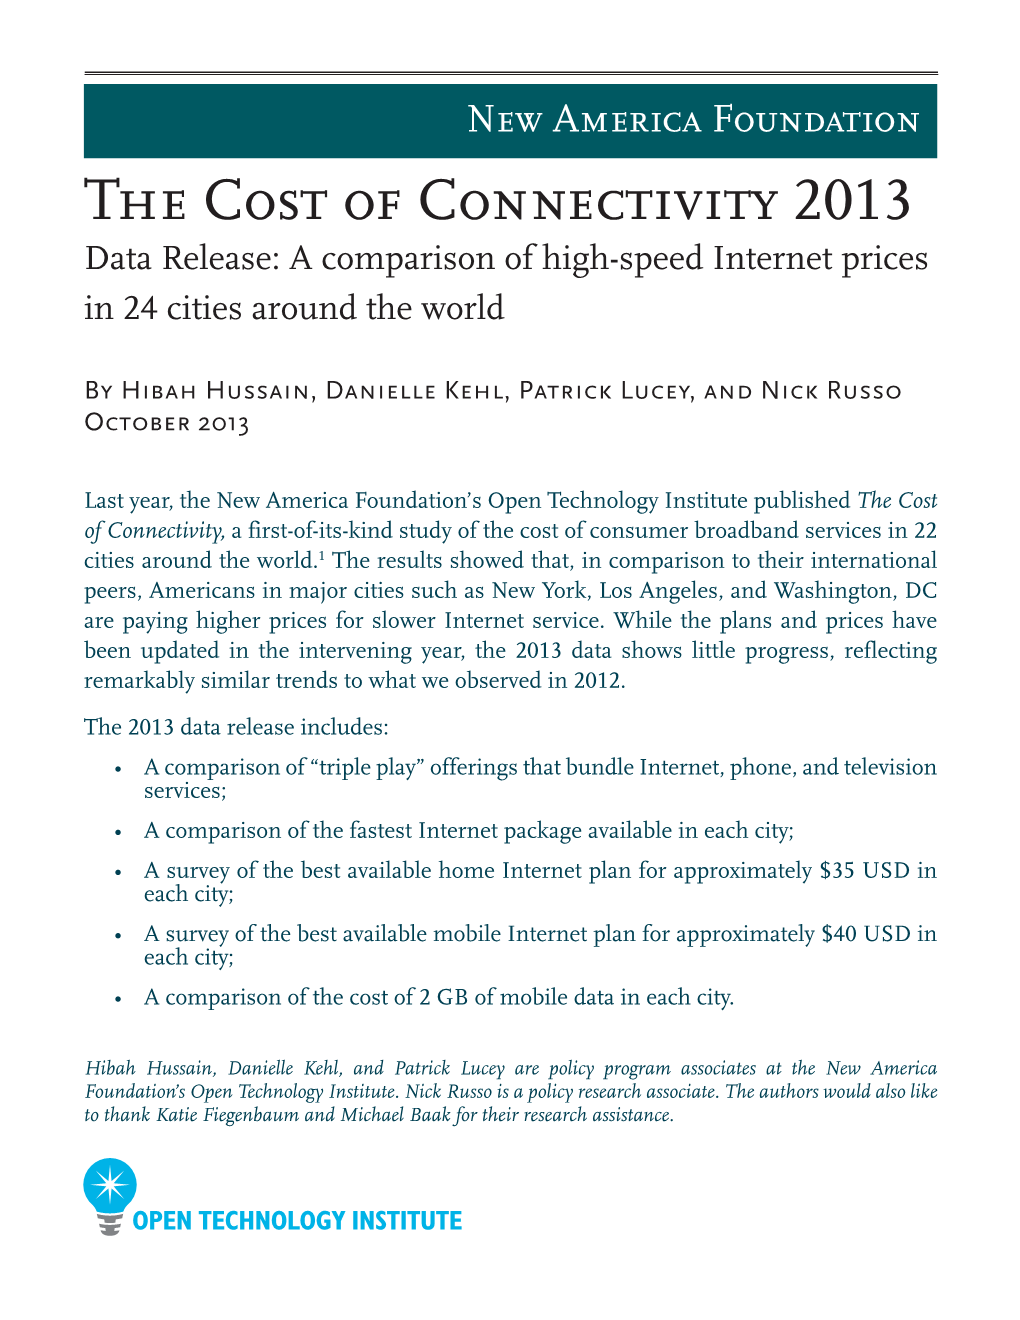 The Cost of Connectivity 2013 Data Release: a Comparison of High-Speed Internet Prices in 24 Cities Around the World